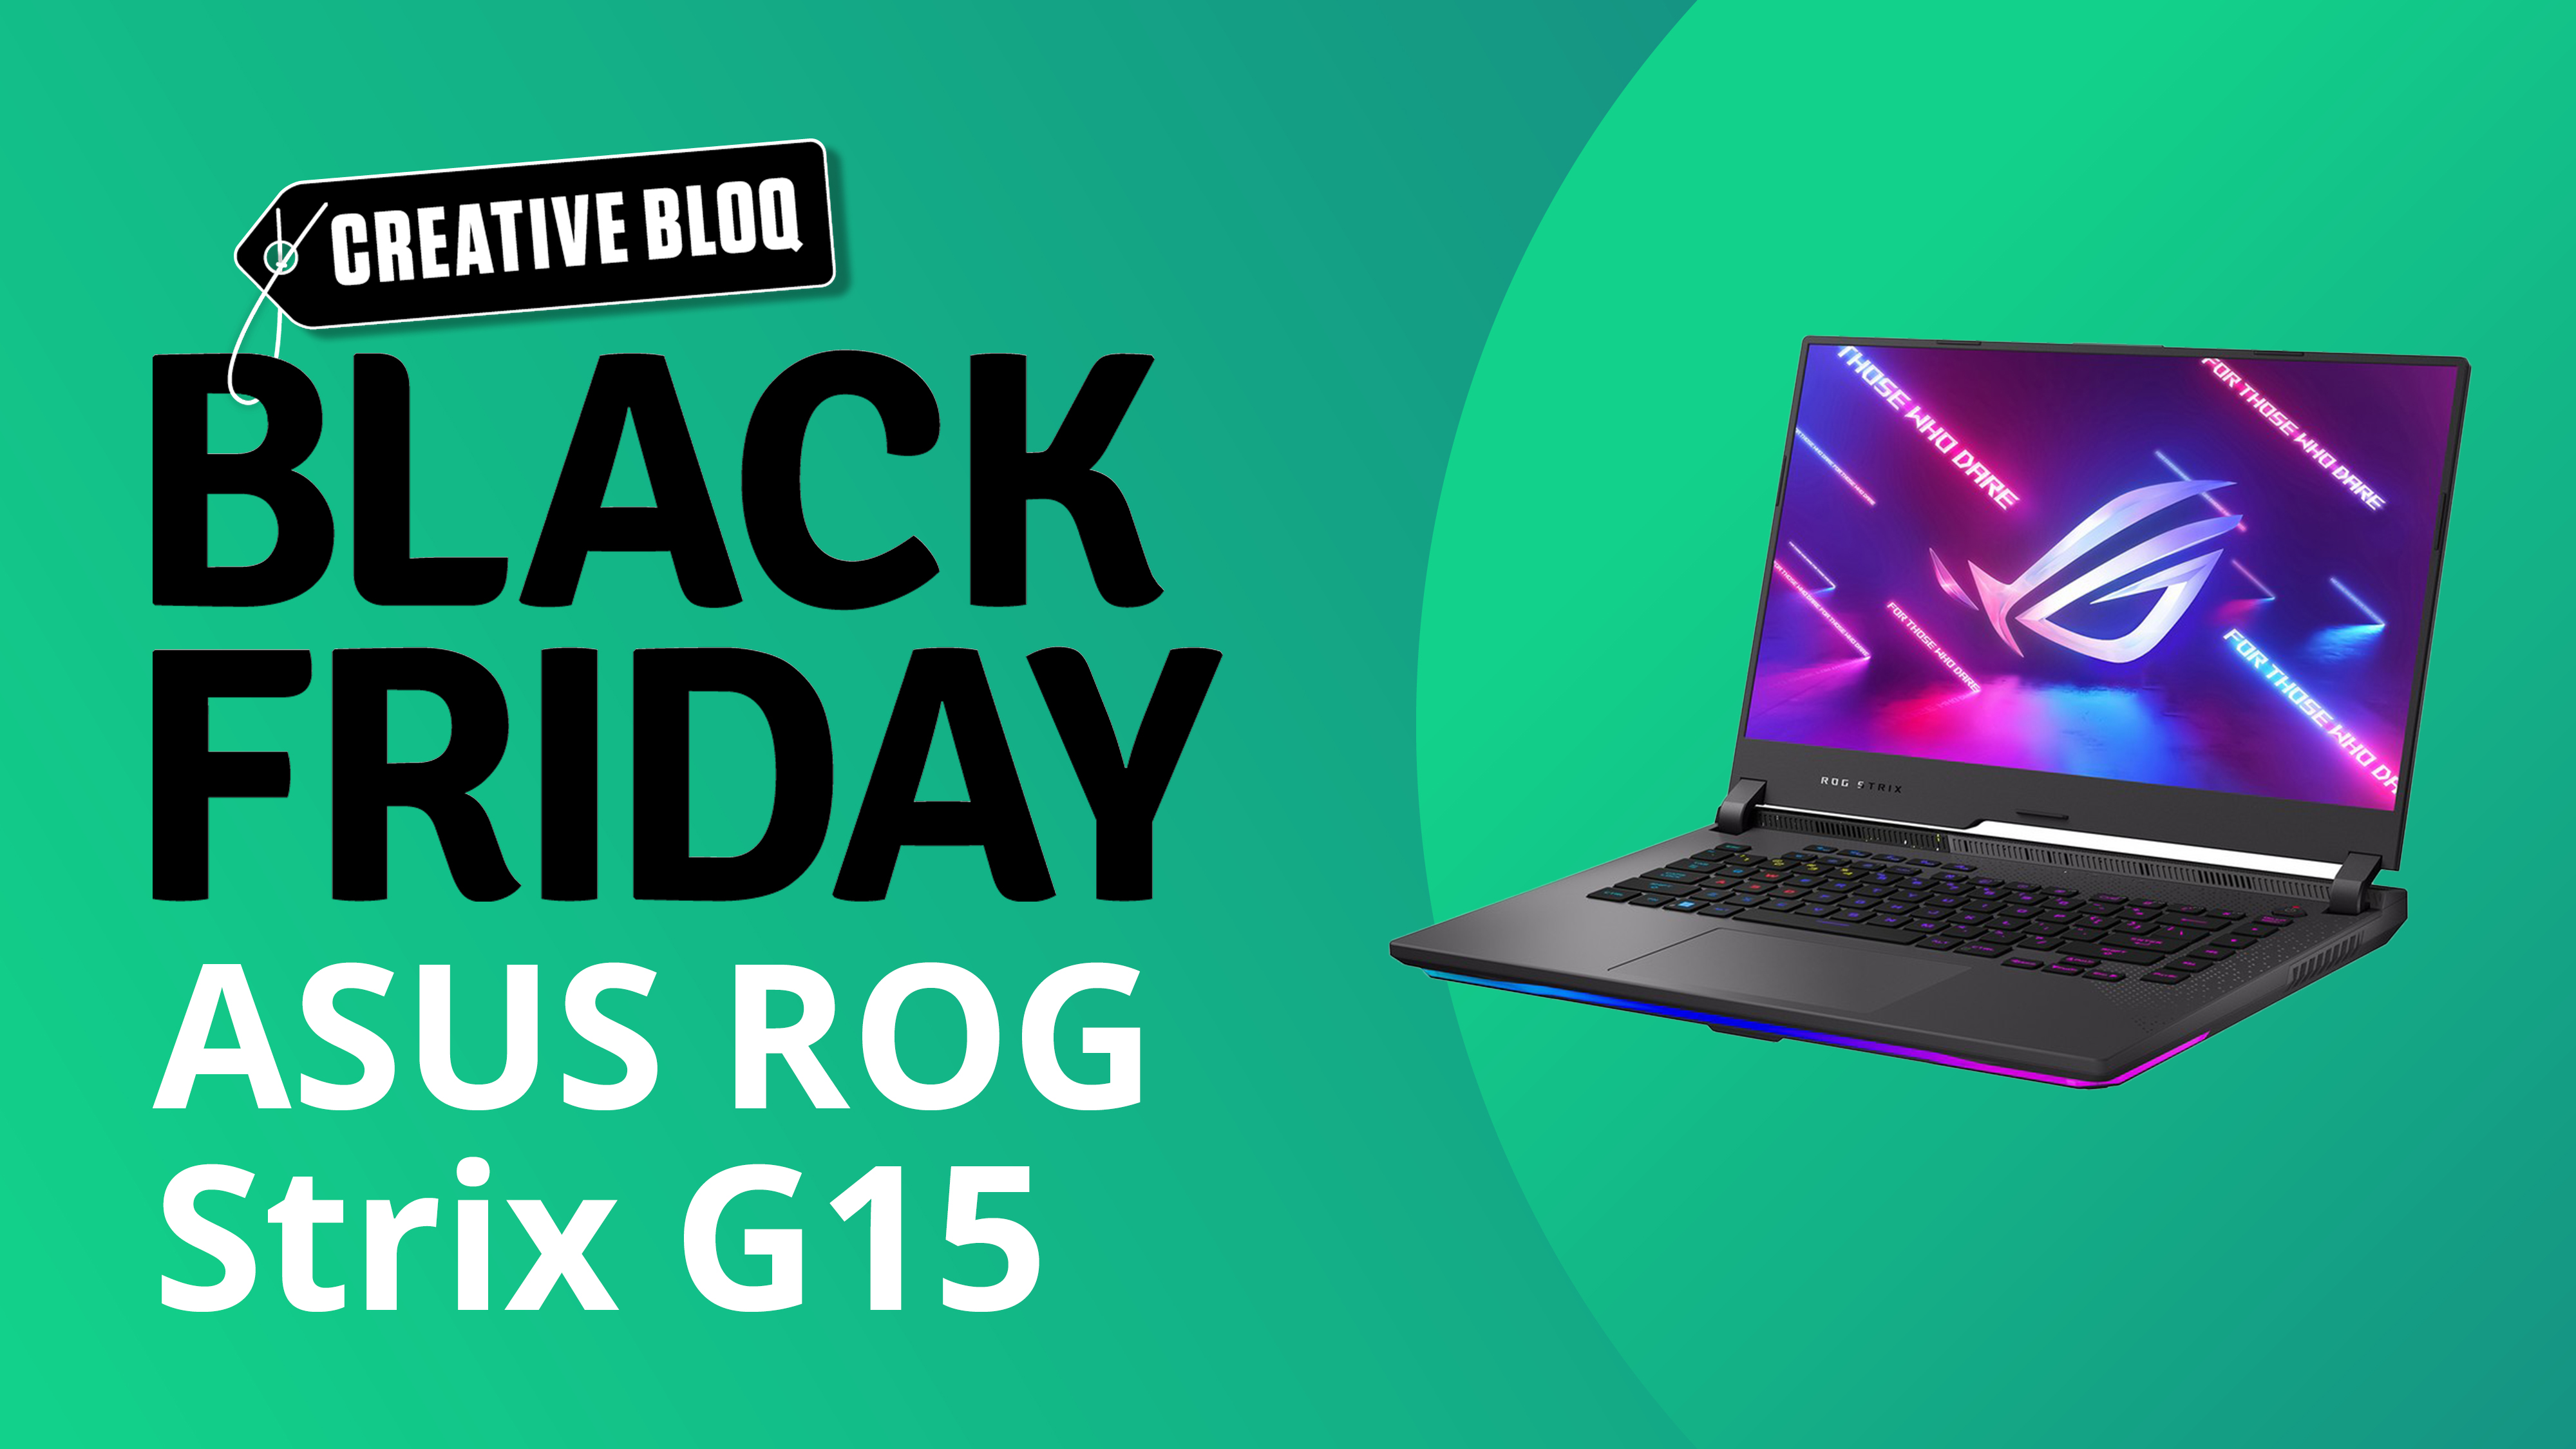 Image of ASUS ROG Strix G15 next to the text Creative Bloq Black Friday: ASUS ROG Strix G15 on a green background